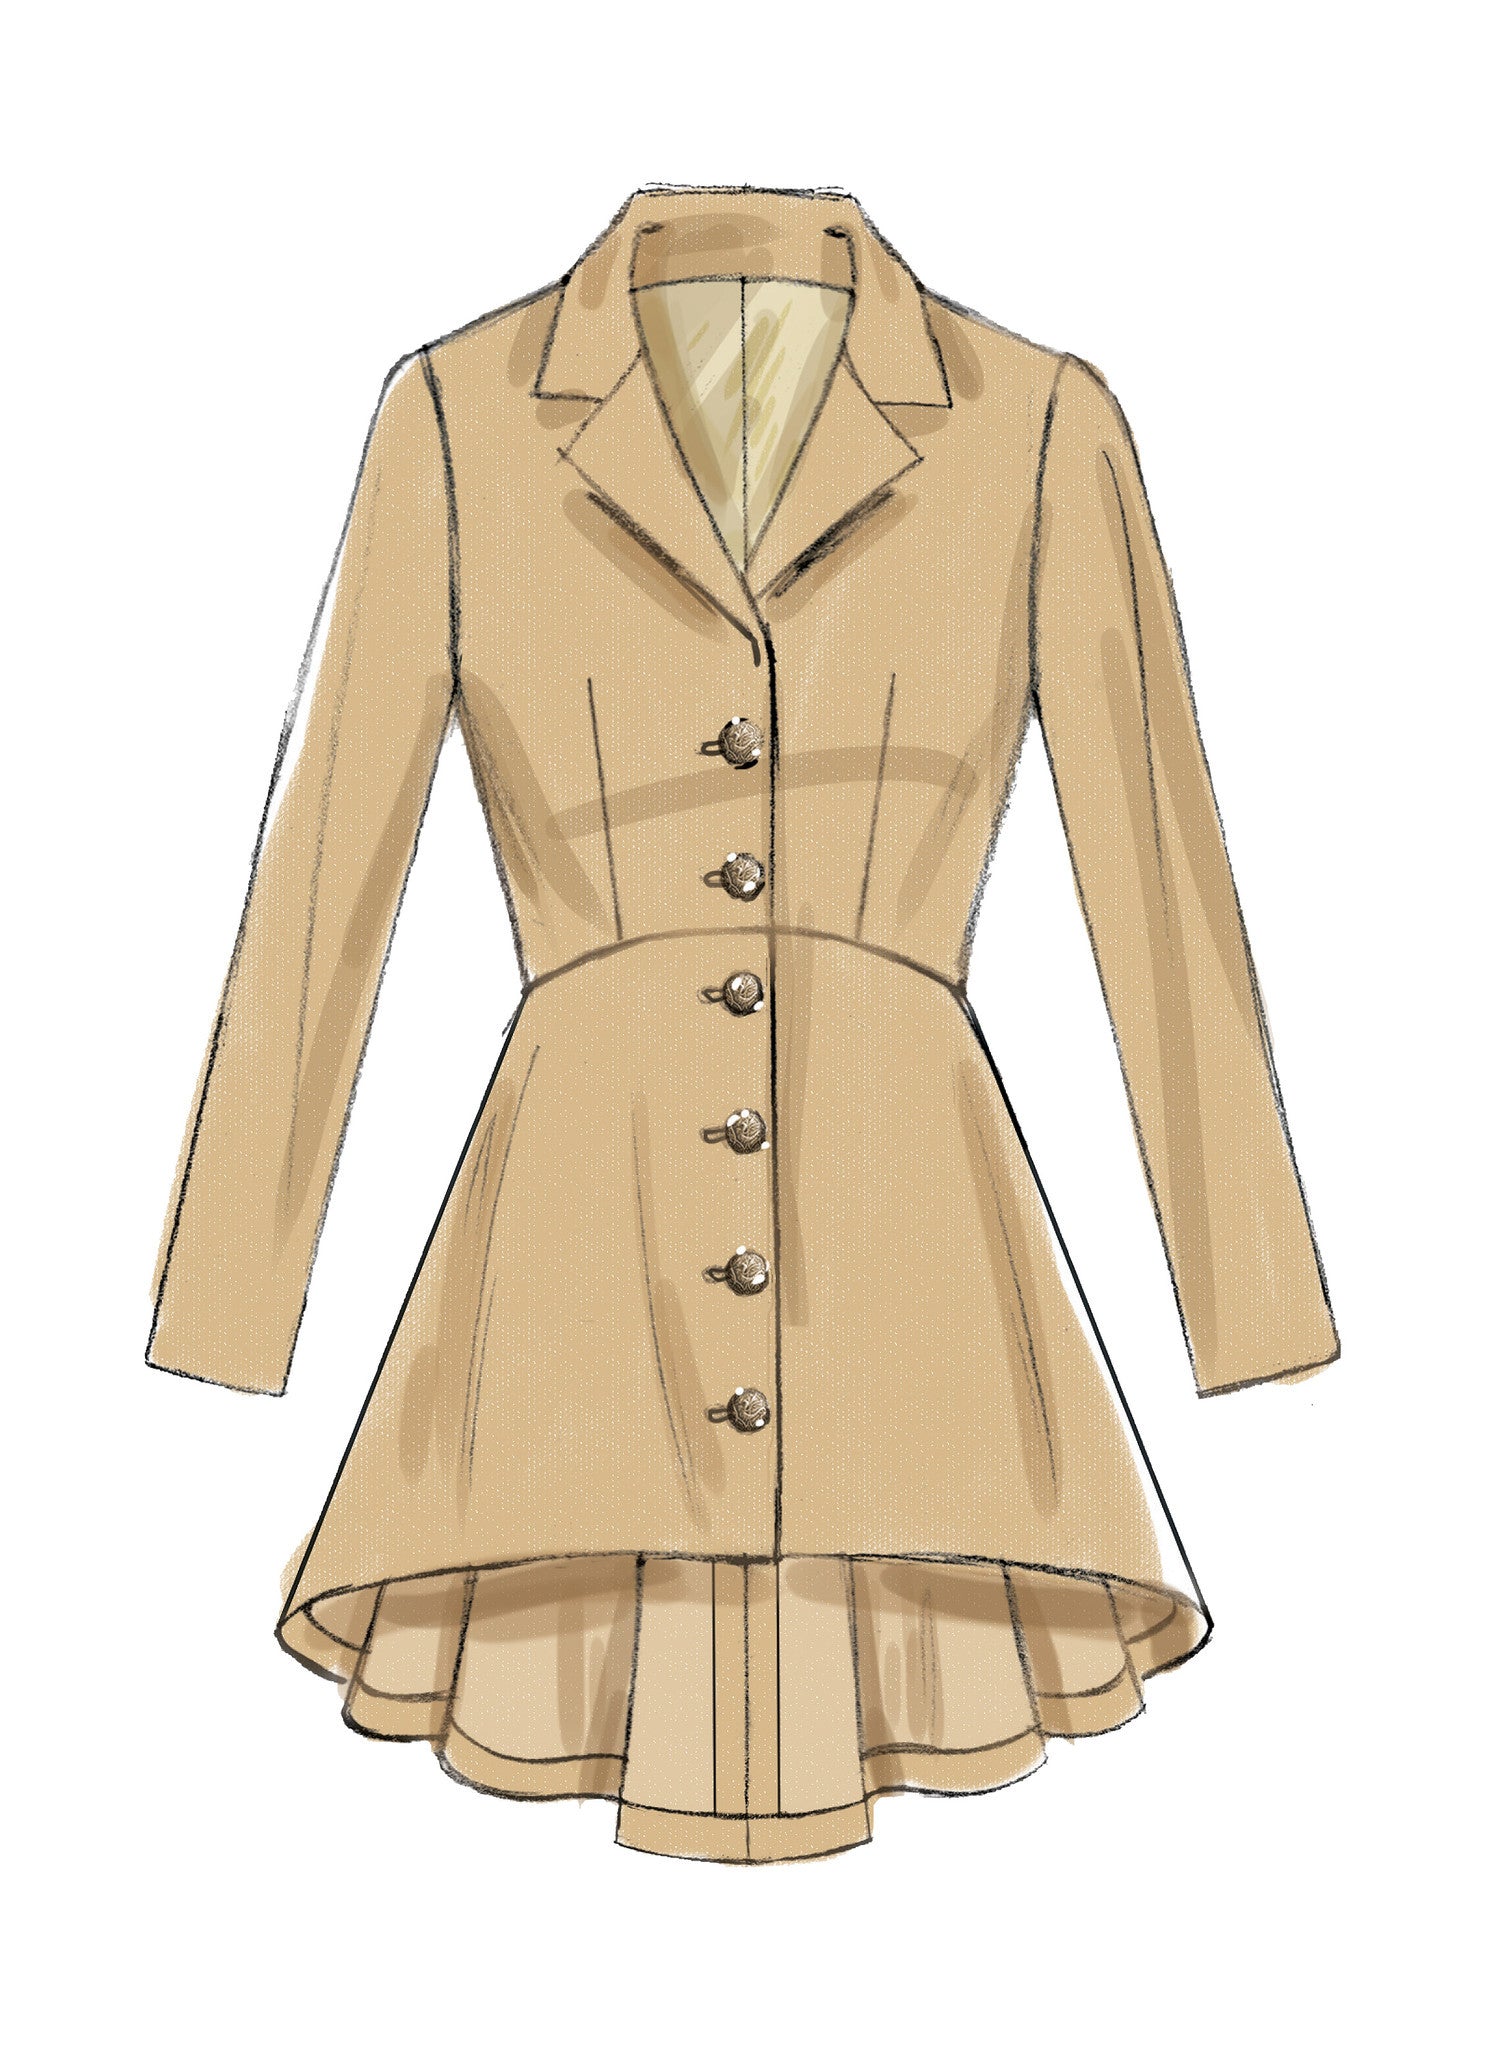 M7513 Misses' Notch-Collar, Peplum Jackets from Jaycotts Sewing Supplies